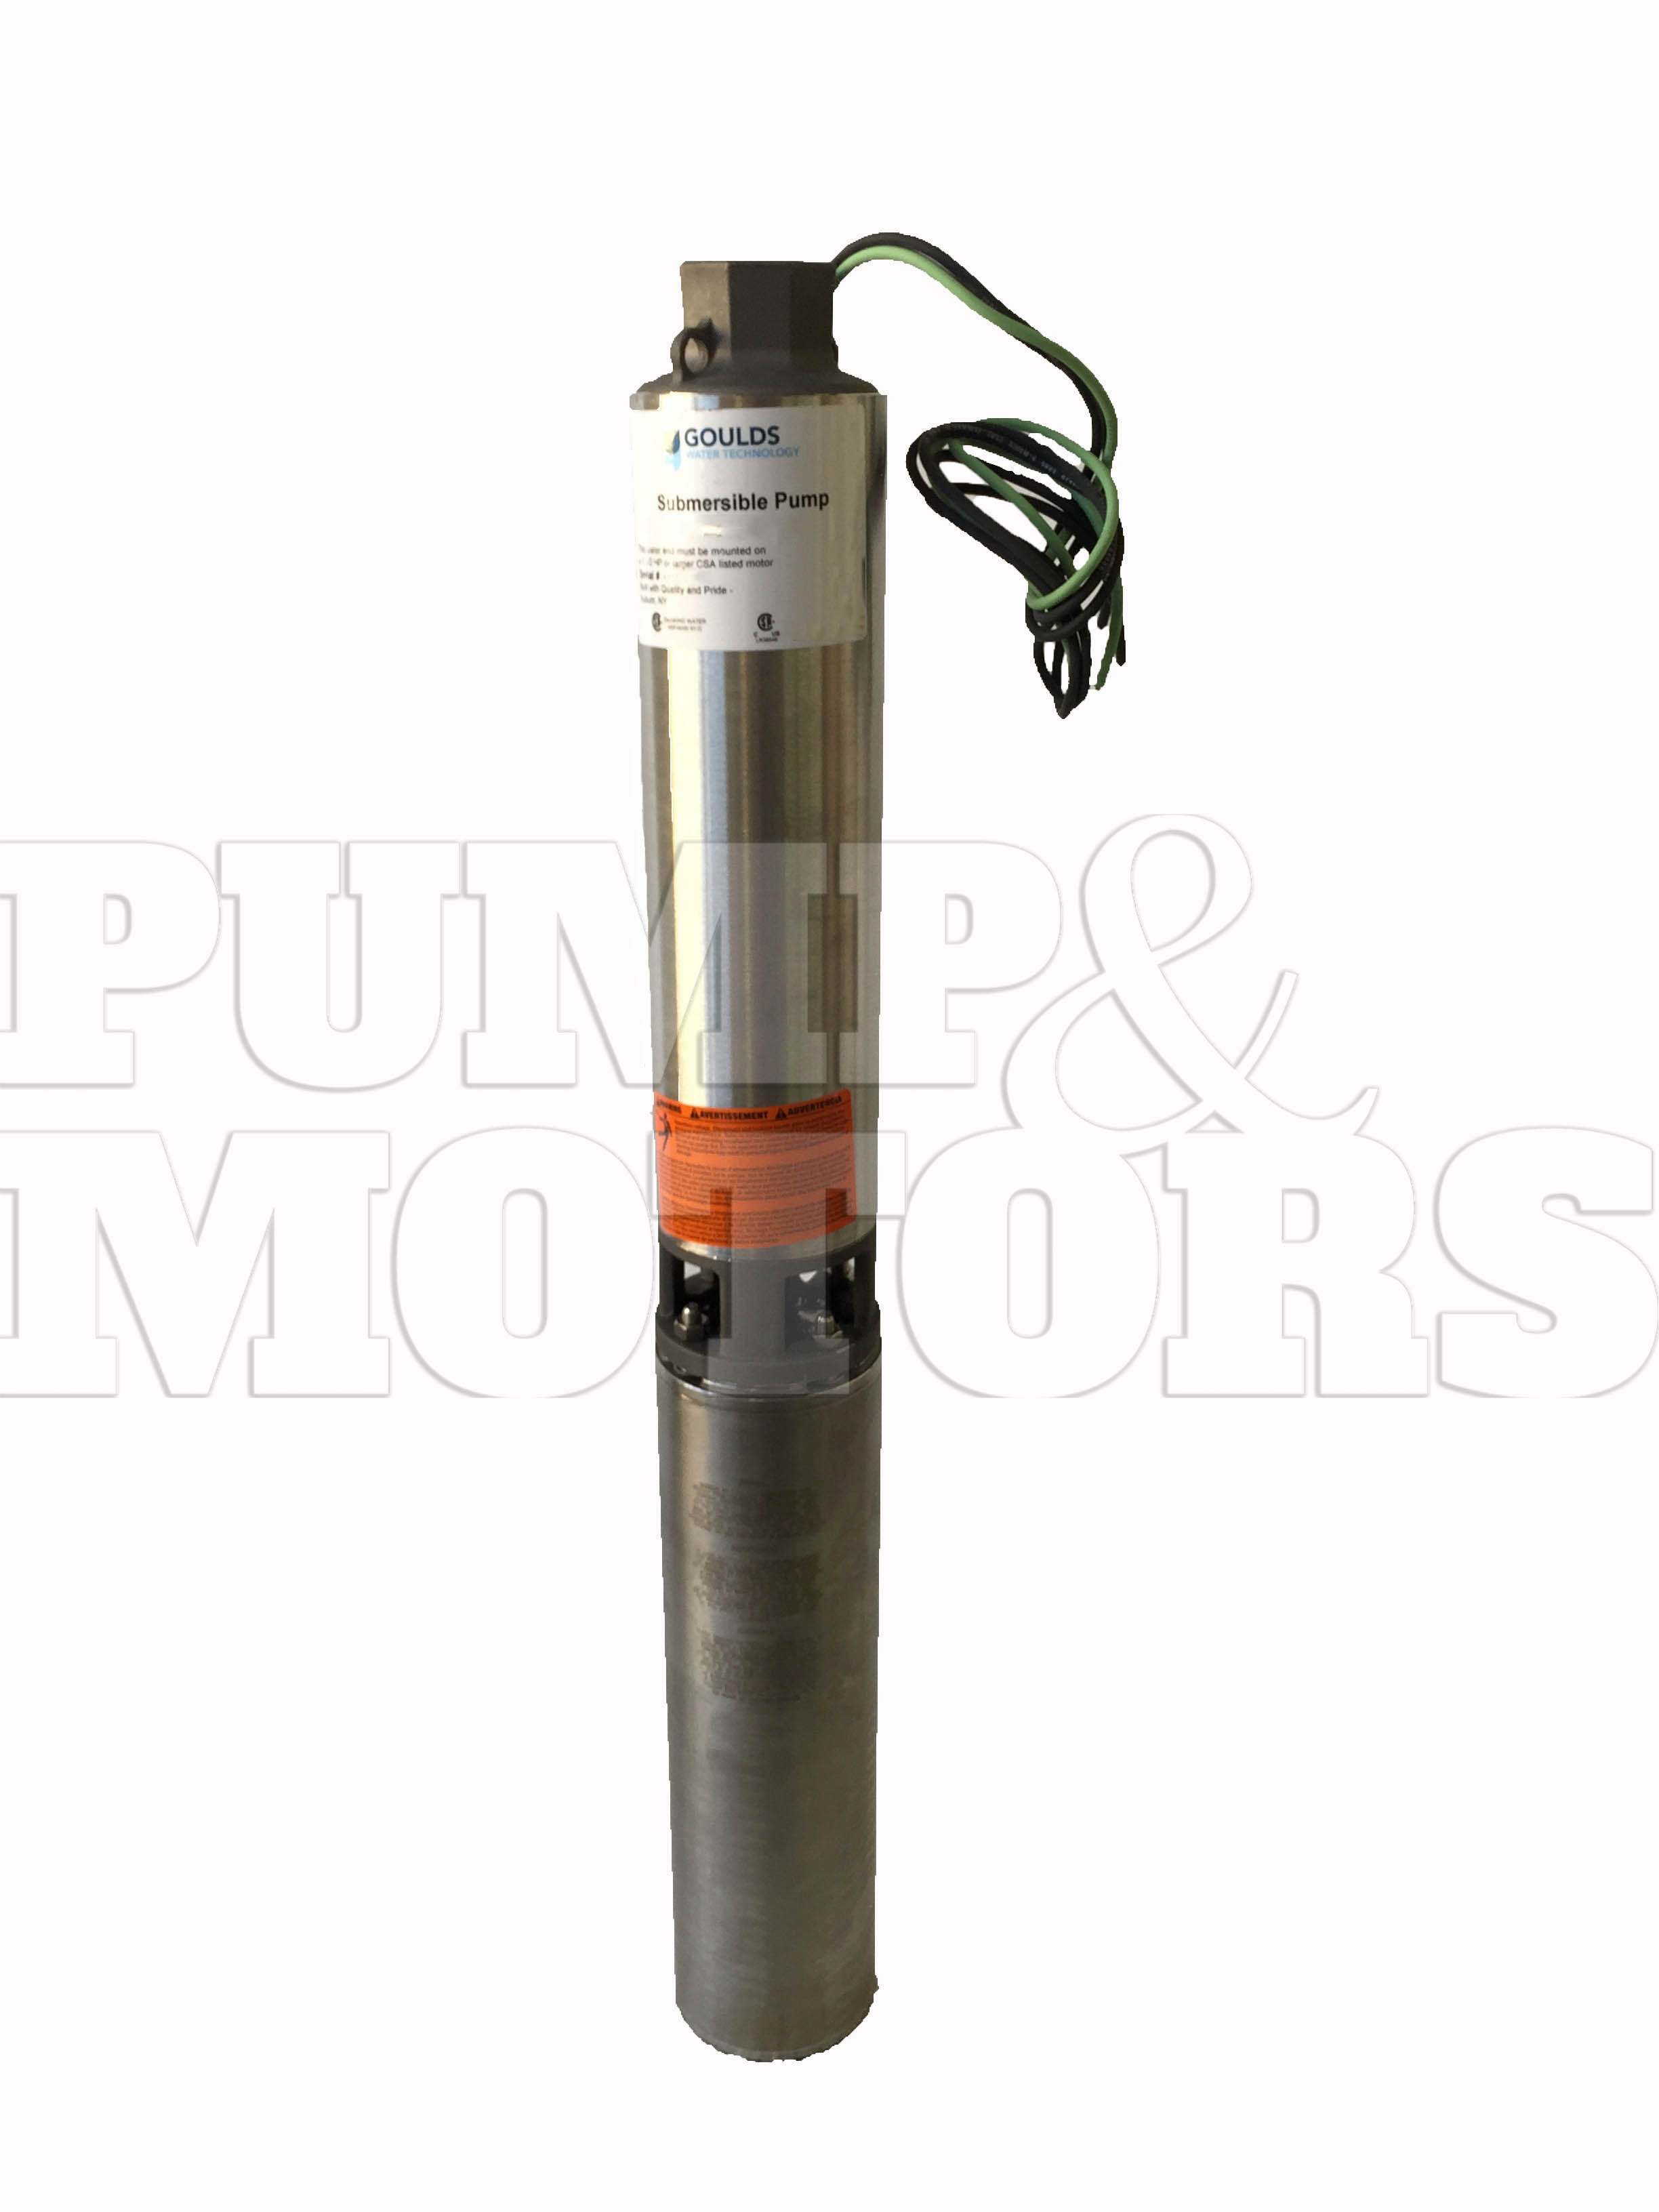 Goulds 18GS10422C 1 HP 230V Submersible Water Well Pump 18GPM